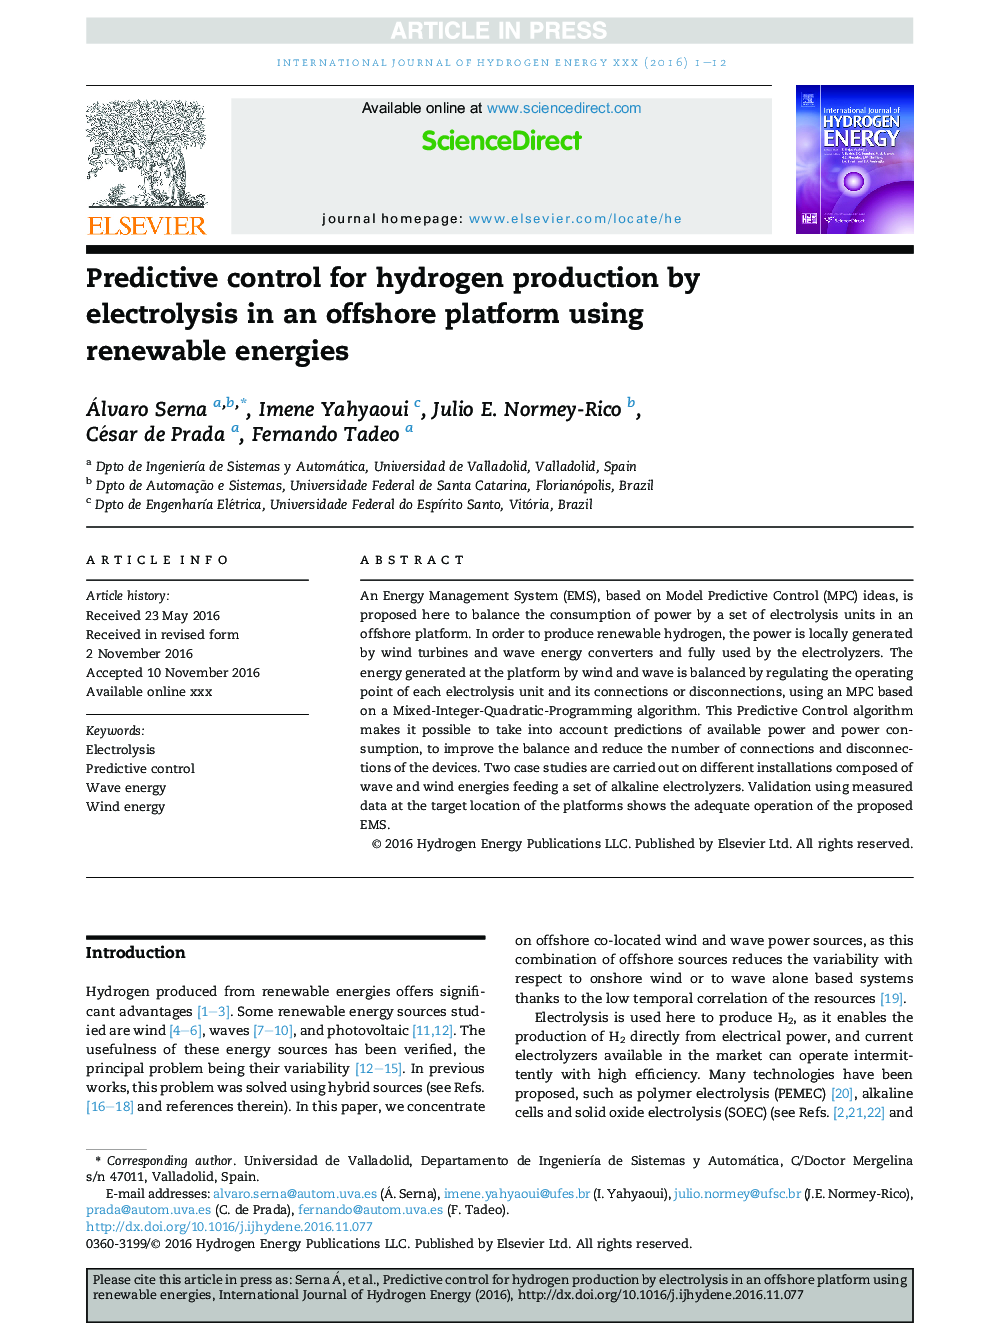 Predictive control for hydrogen production by electrolysis in an offshore platform using renewable energies